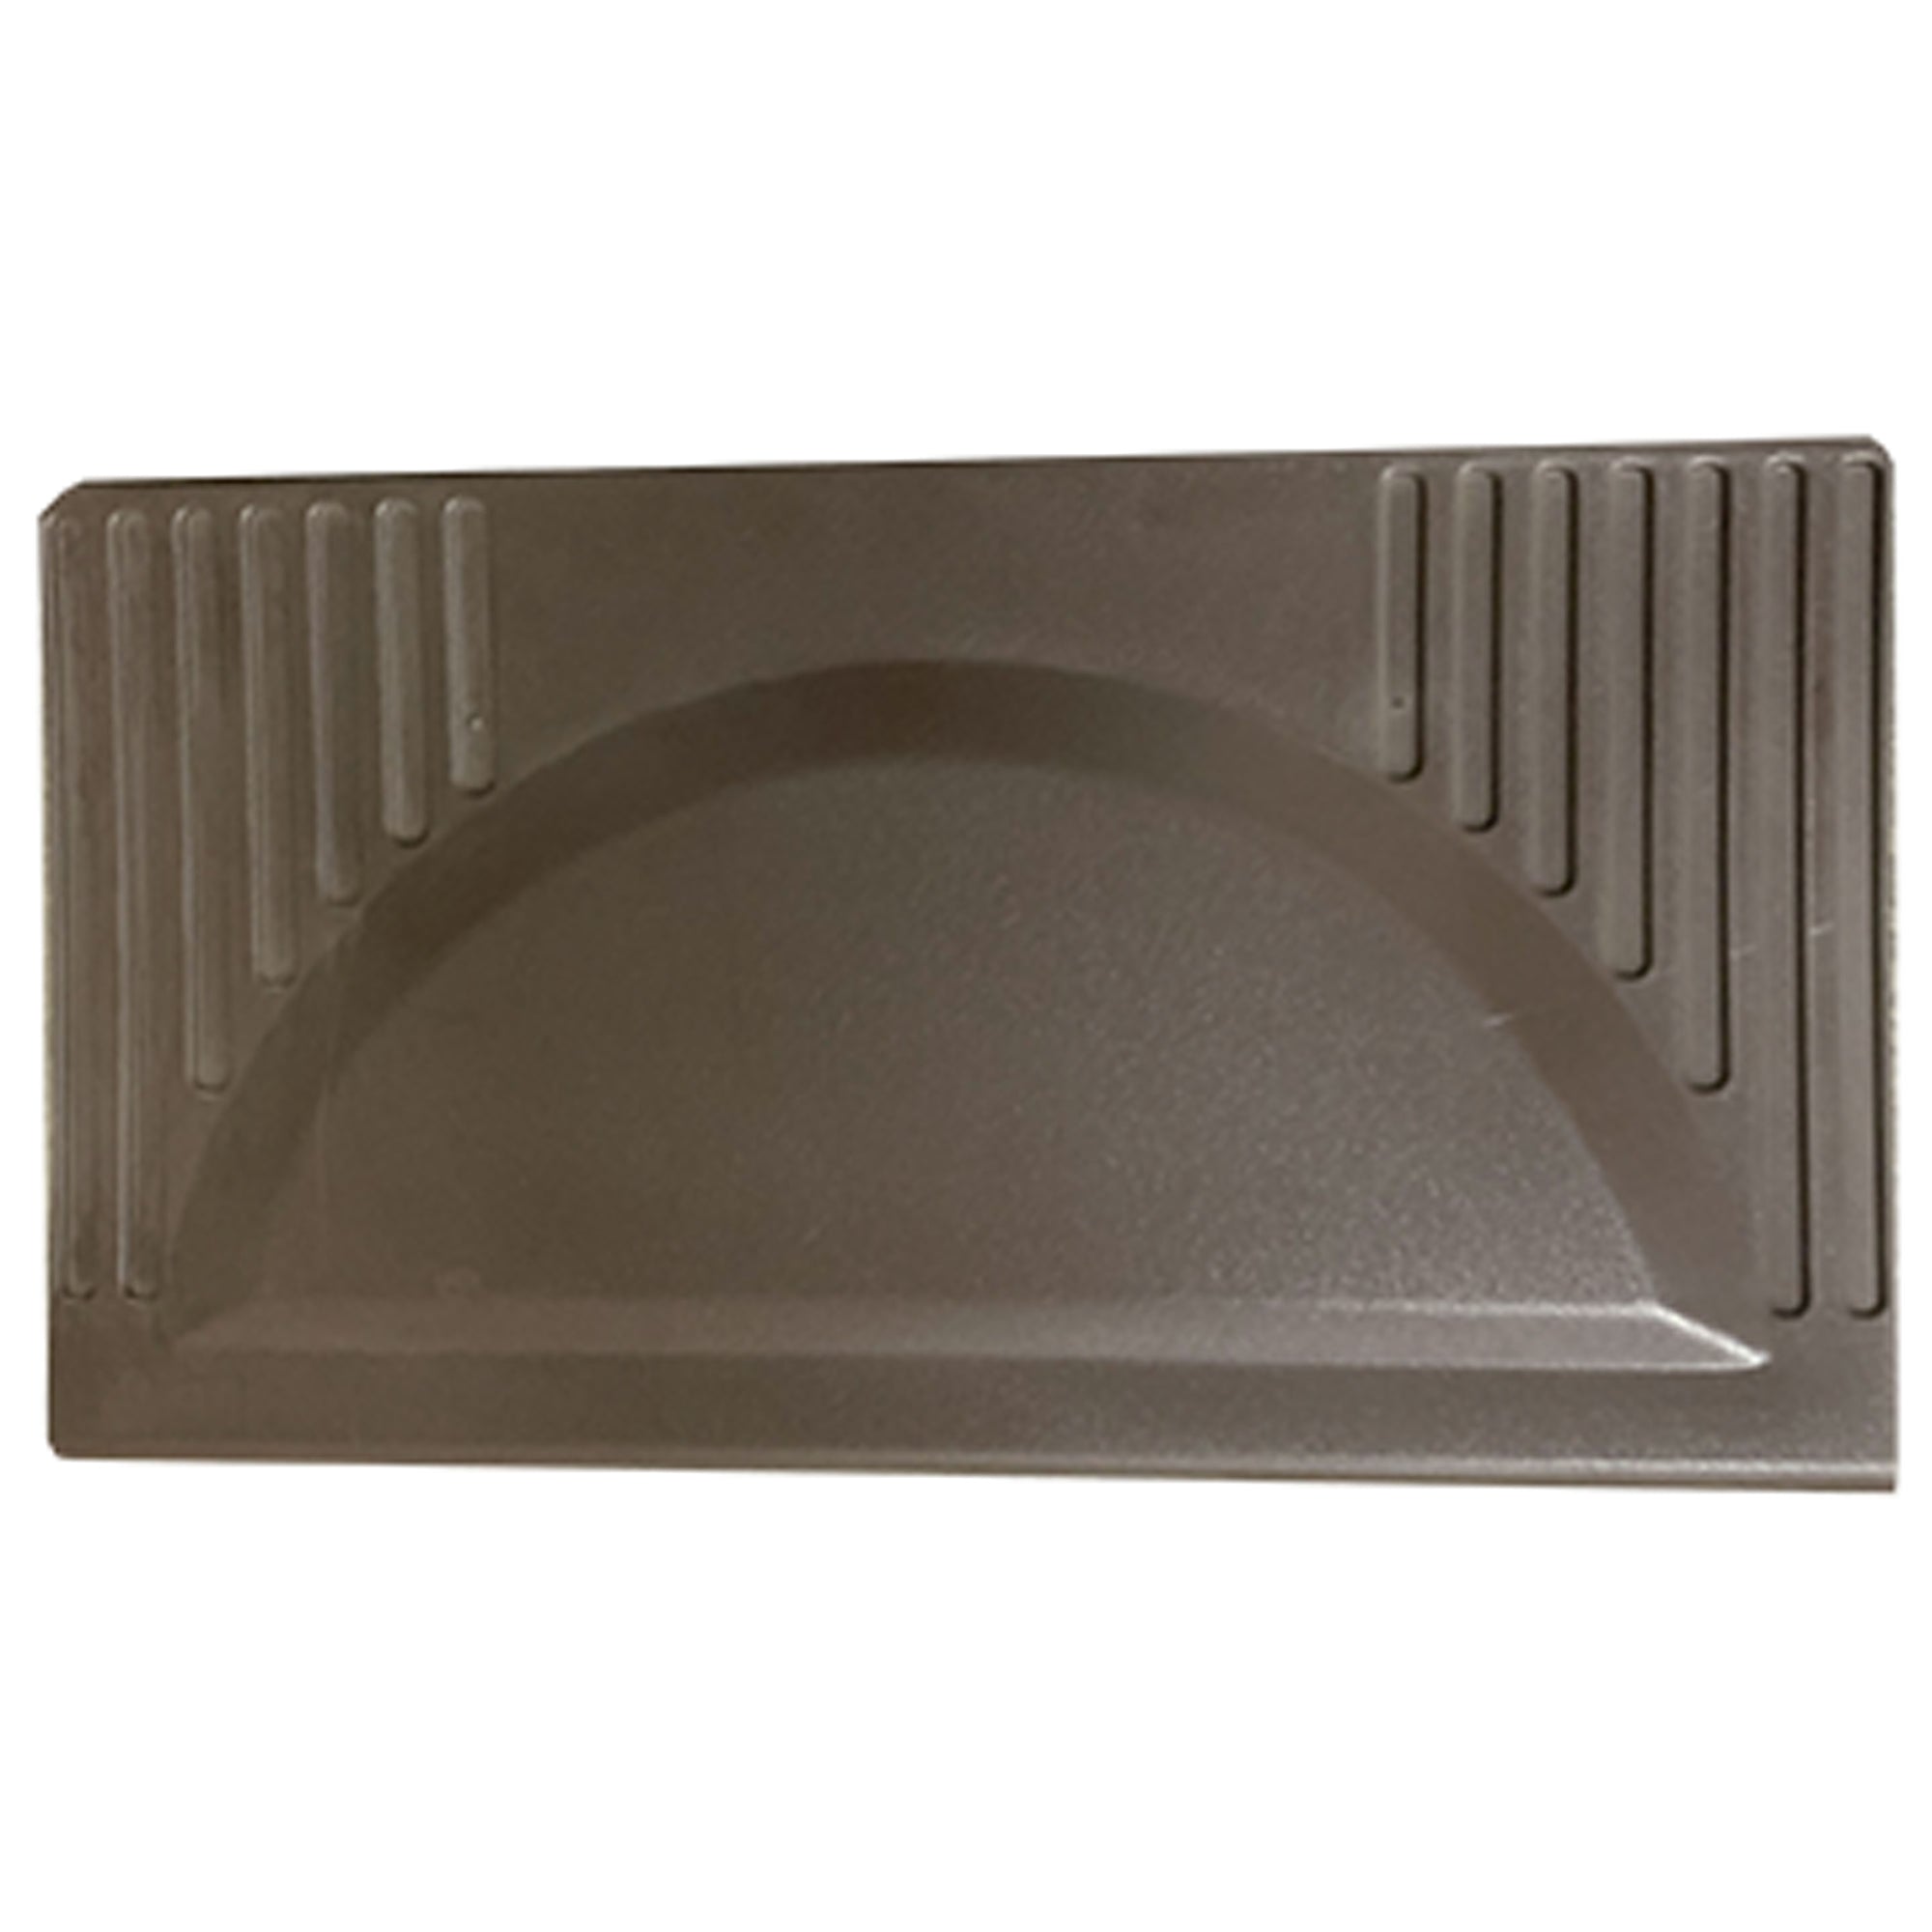 WFCO Technologies WF-8725-PDA Door Assembly for WF-8712-P & WF-8725-P Power Centers - 7.25" x 11.75", Brown